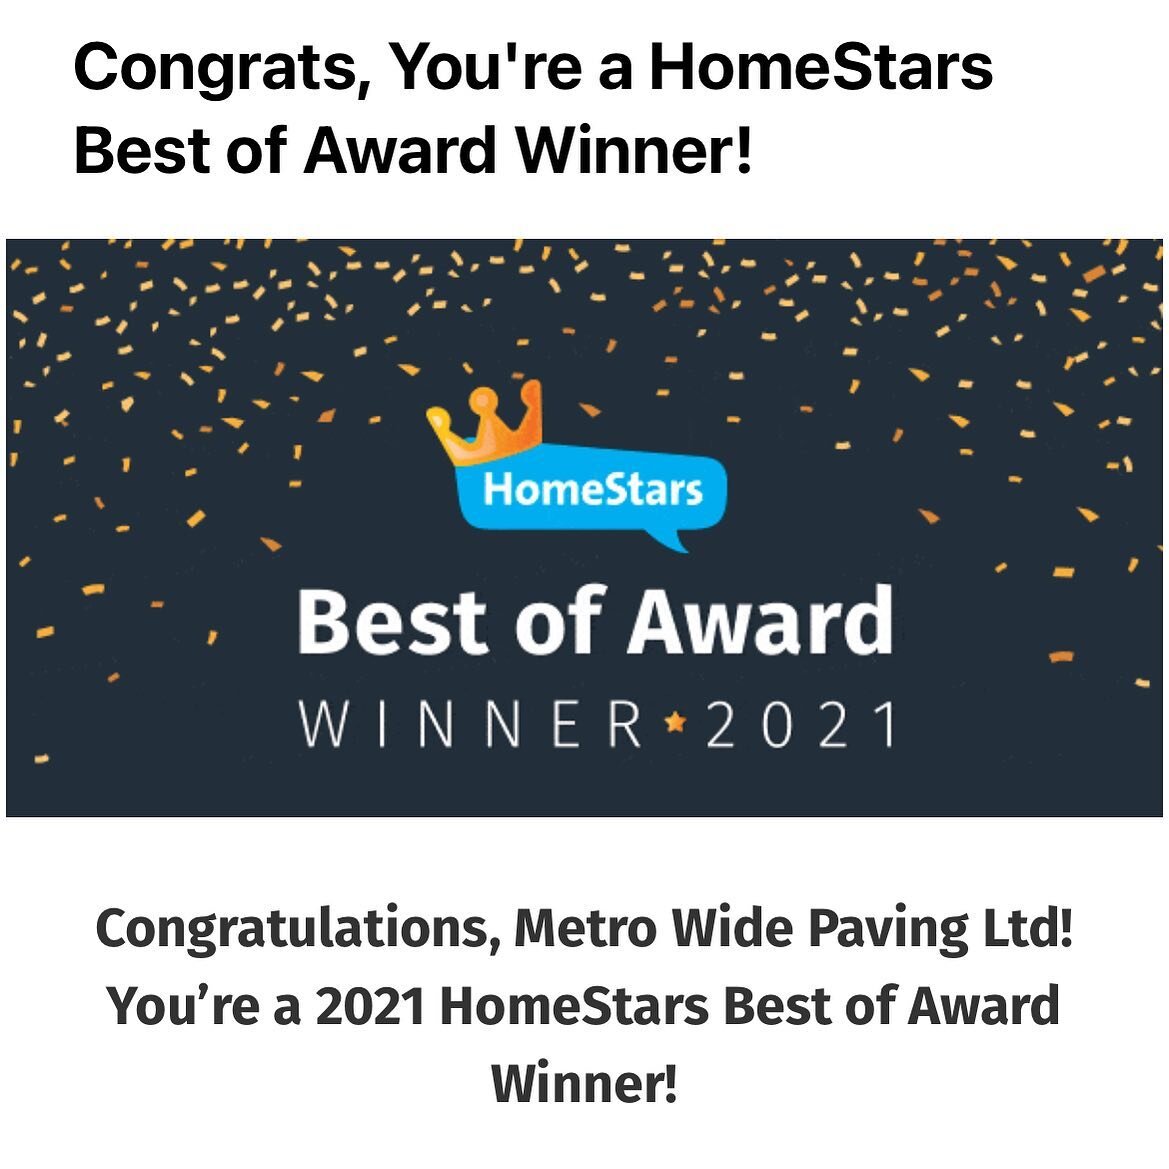 We did it again! 2 years running, we have been crowned @homestars Best of Award Winner for paving in the GTA. It took a lot to get this award: from our guys who work tirelessly around the clock executing top notch quality projects each and every toda